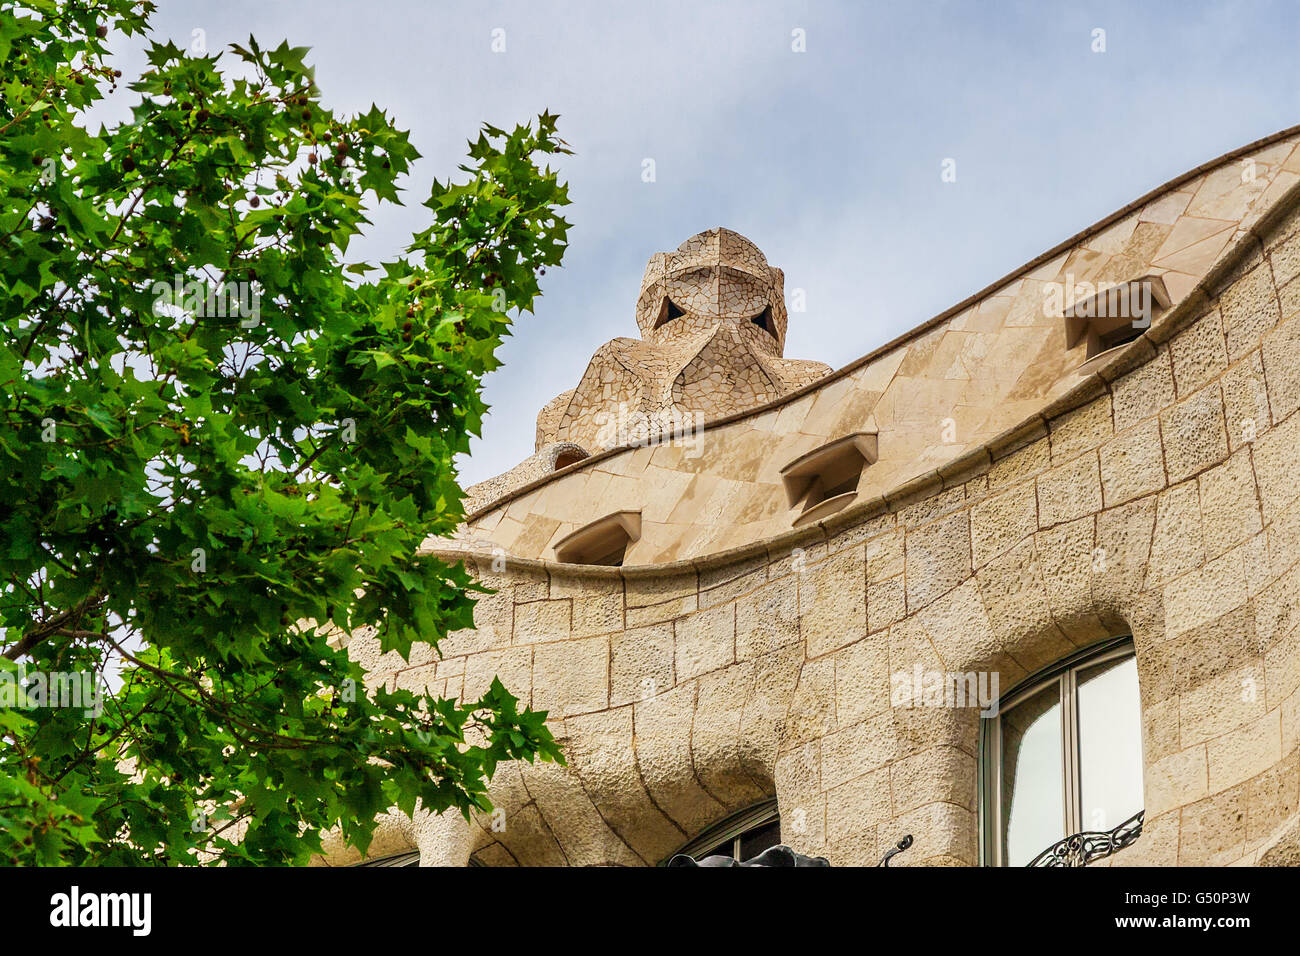 Barcelona Attractions, traditional architectures in Barcelona, Catalonia, Spain. Stock Photo